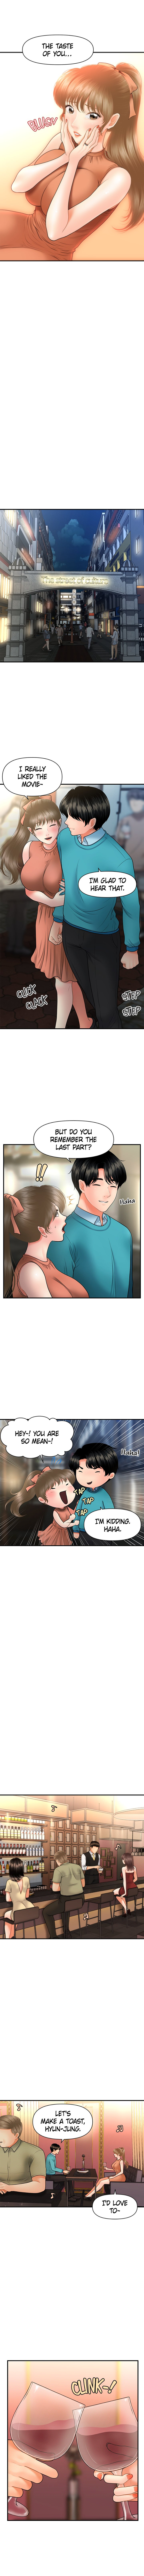 You’re so Handsome - Chapter 31 Page 5